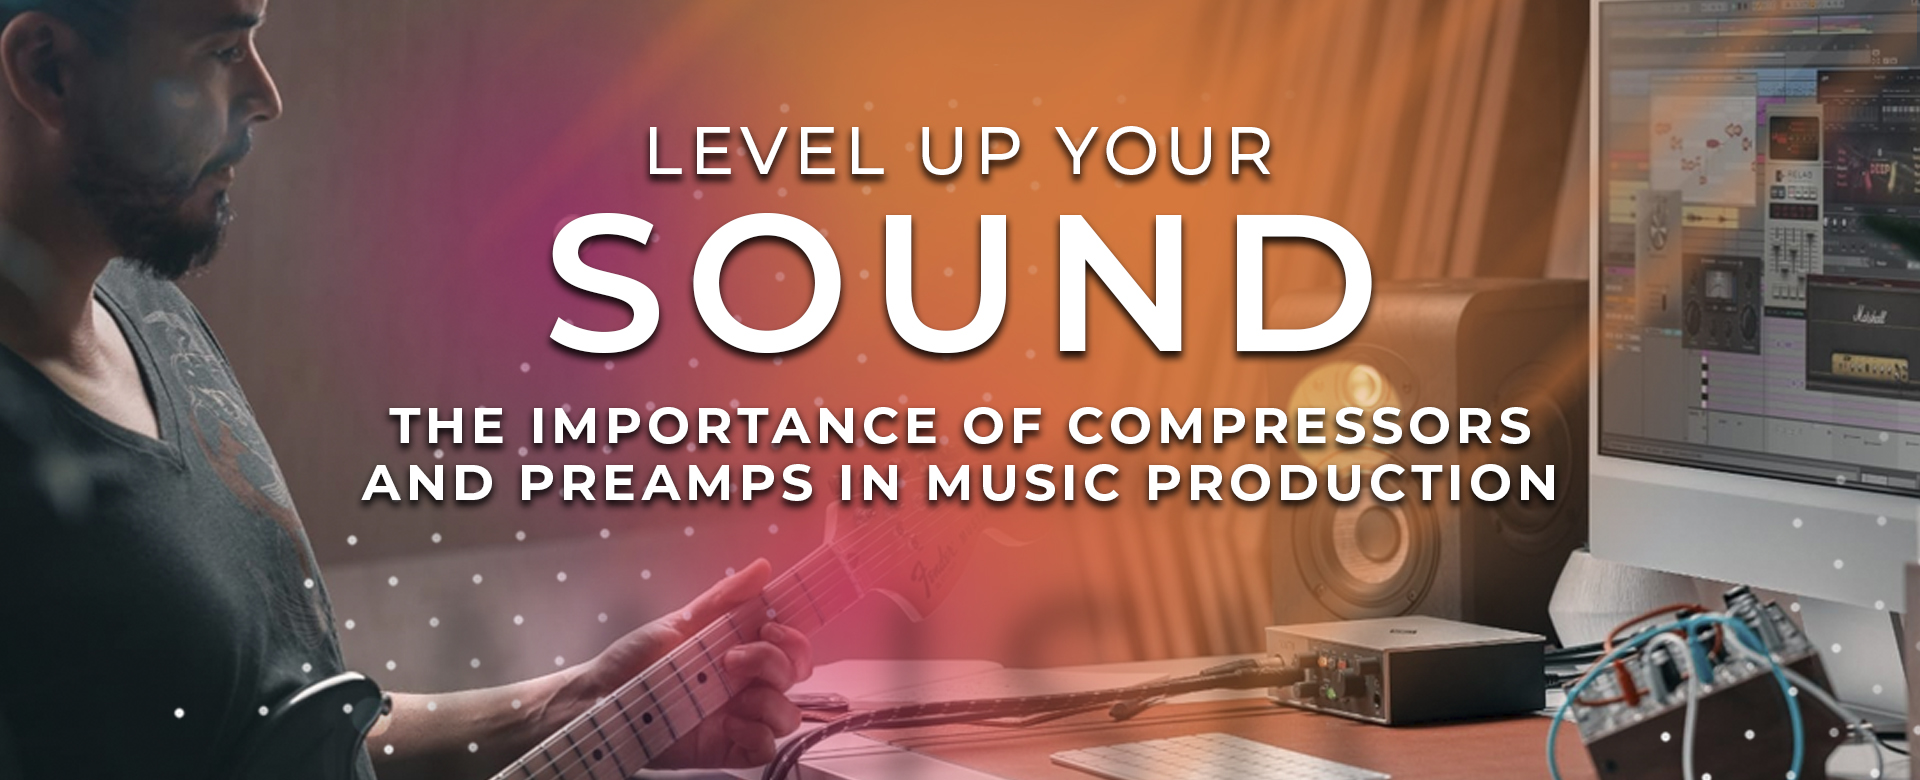 Level Up Your Sound